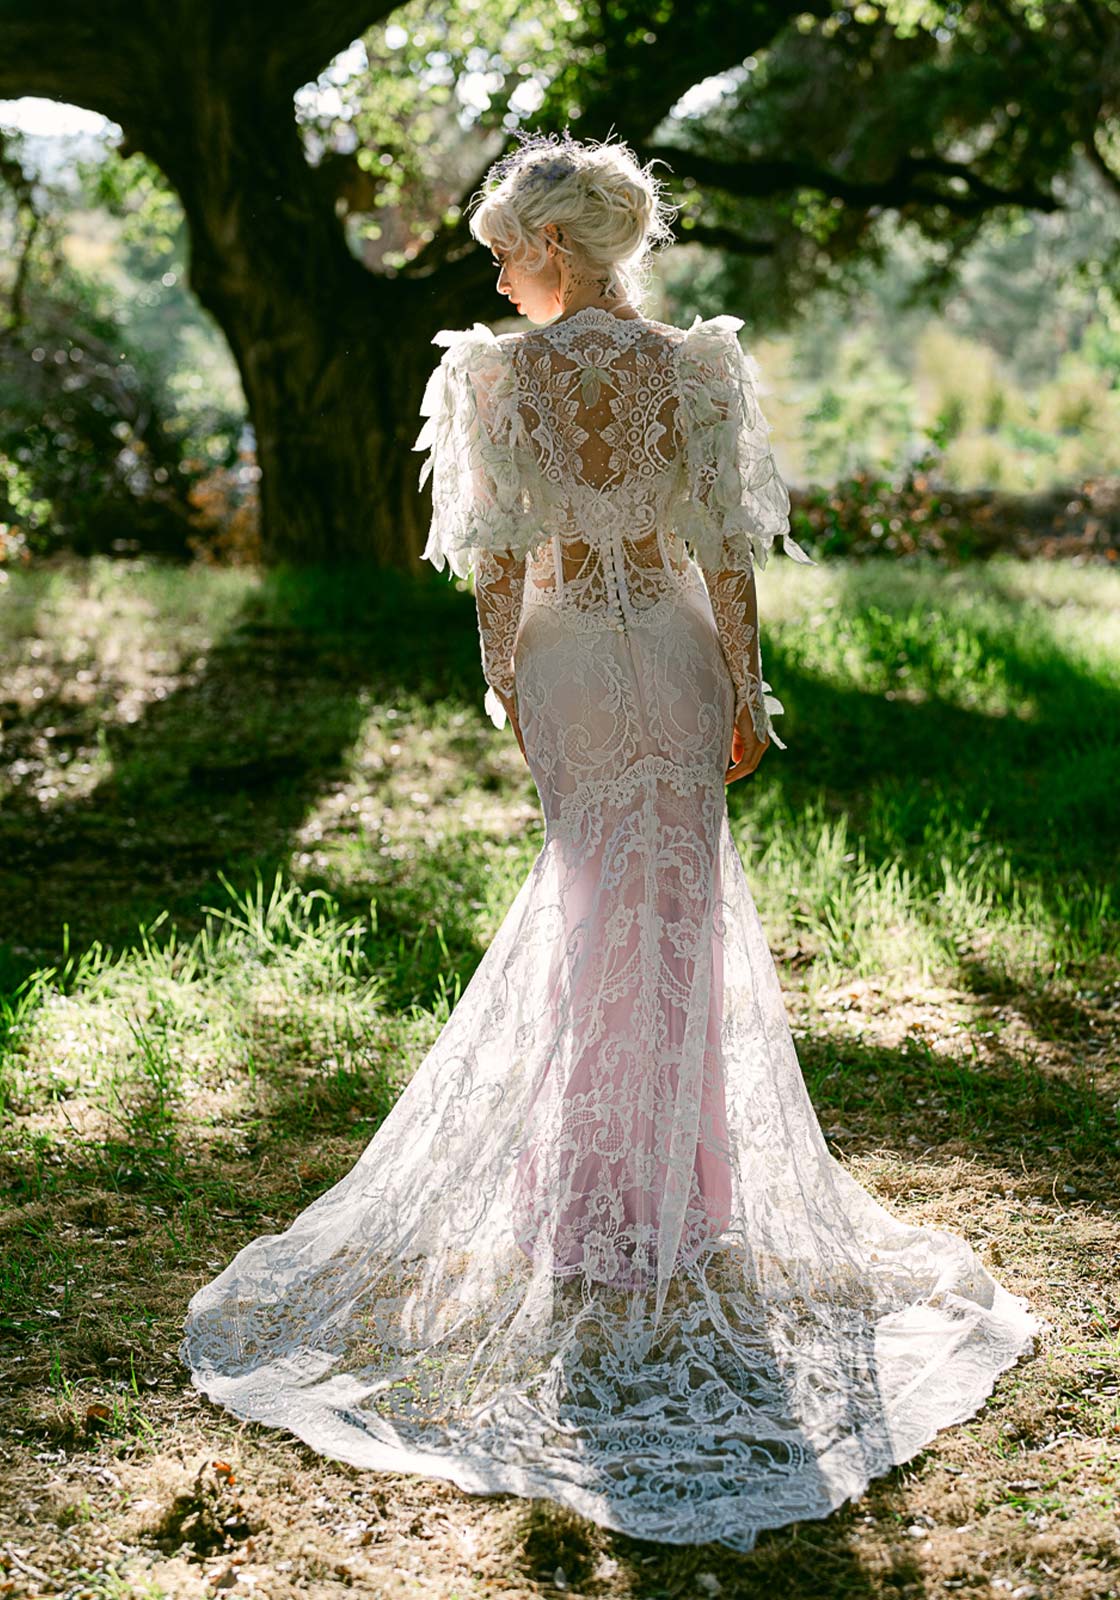 Everglade with the Quill Lace Wedding Dress